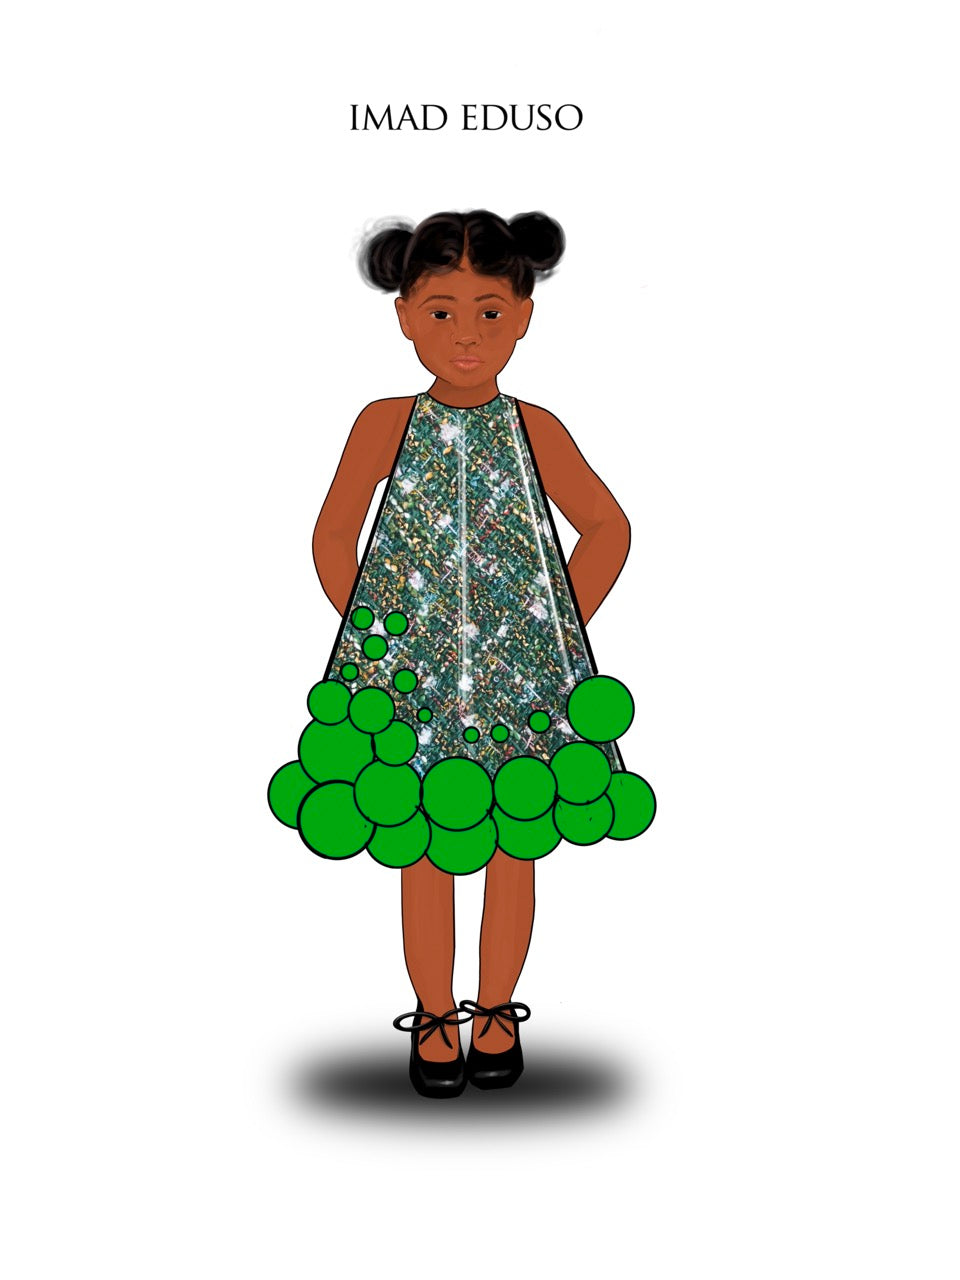 An illustration of a kid model wearing a Green dress with sequins embellishment